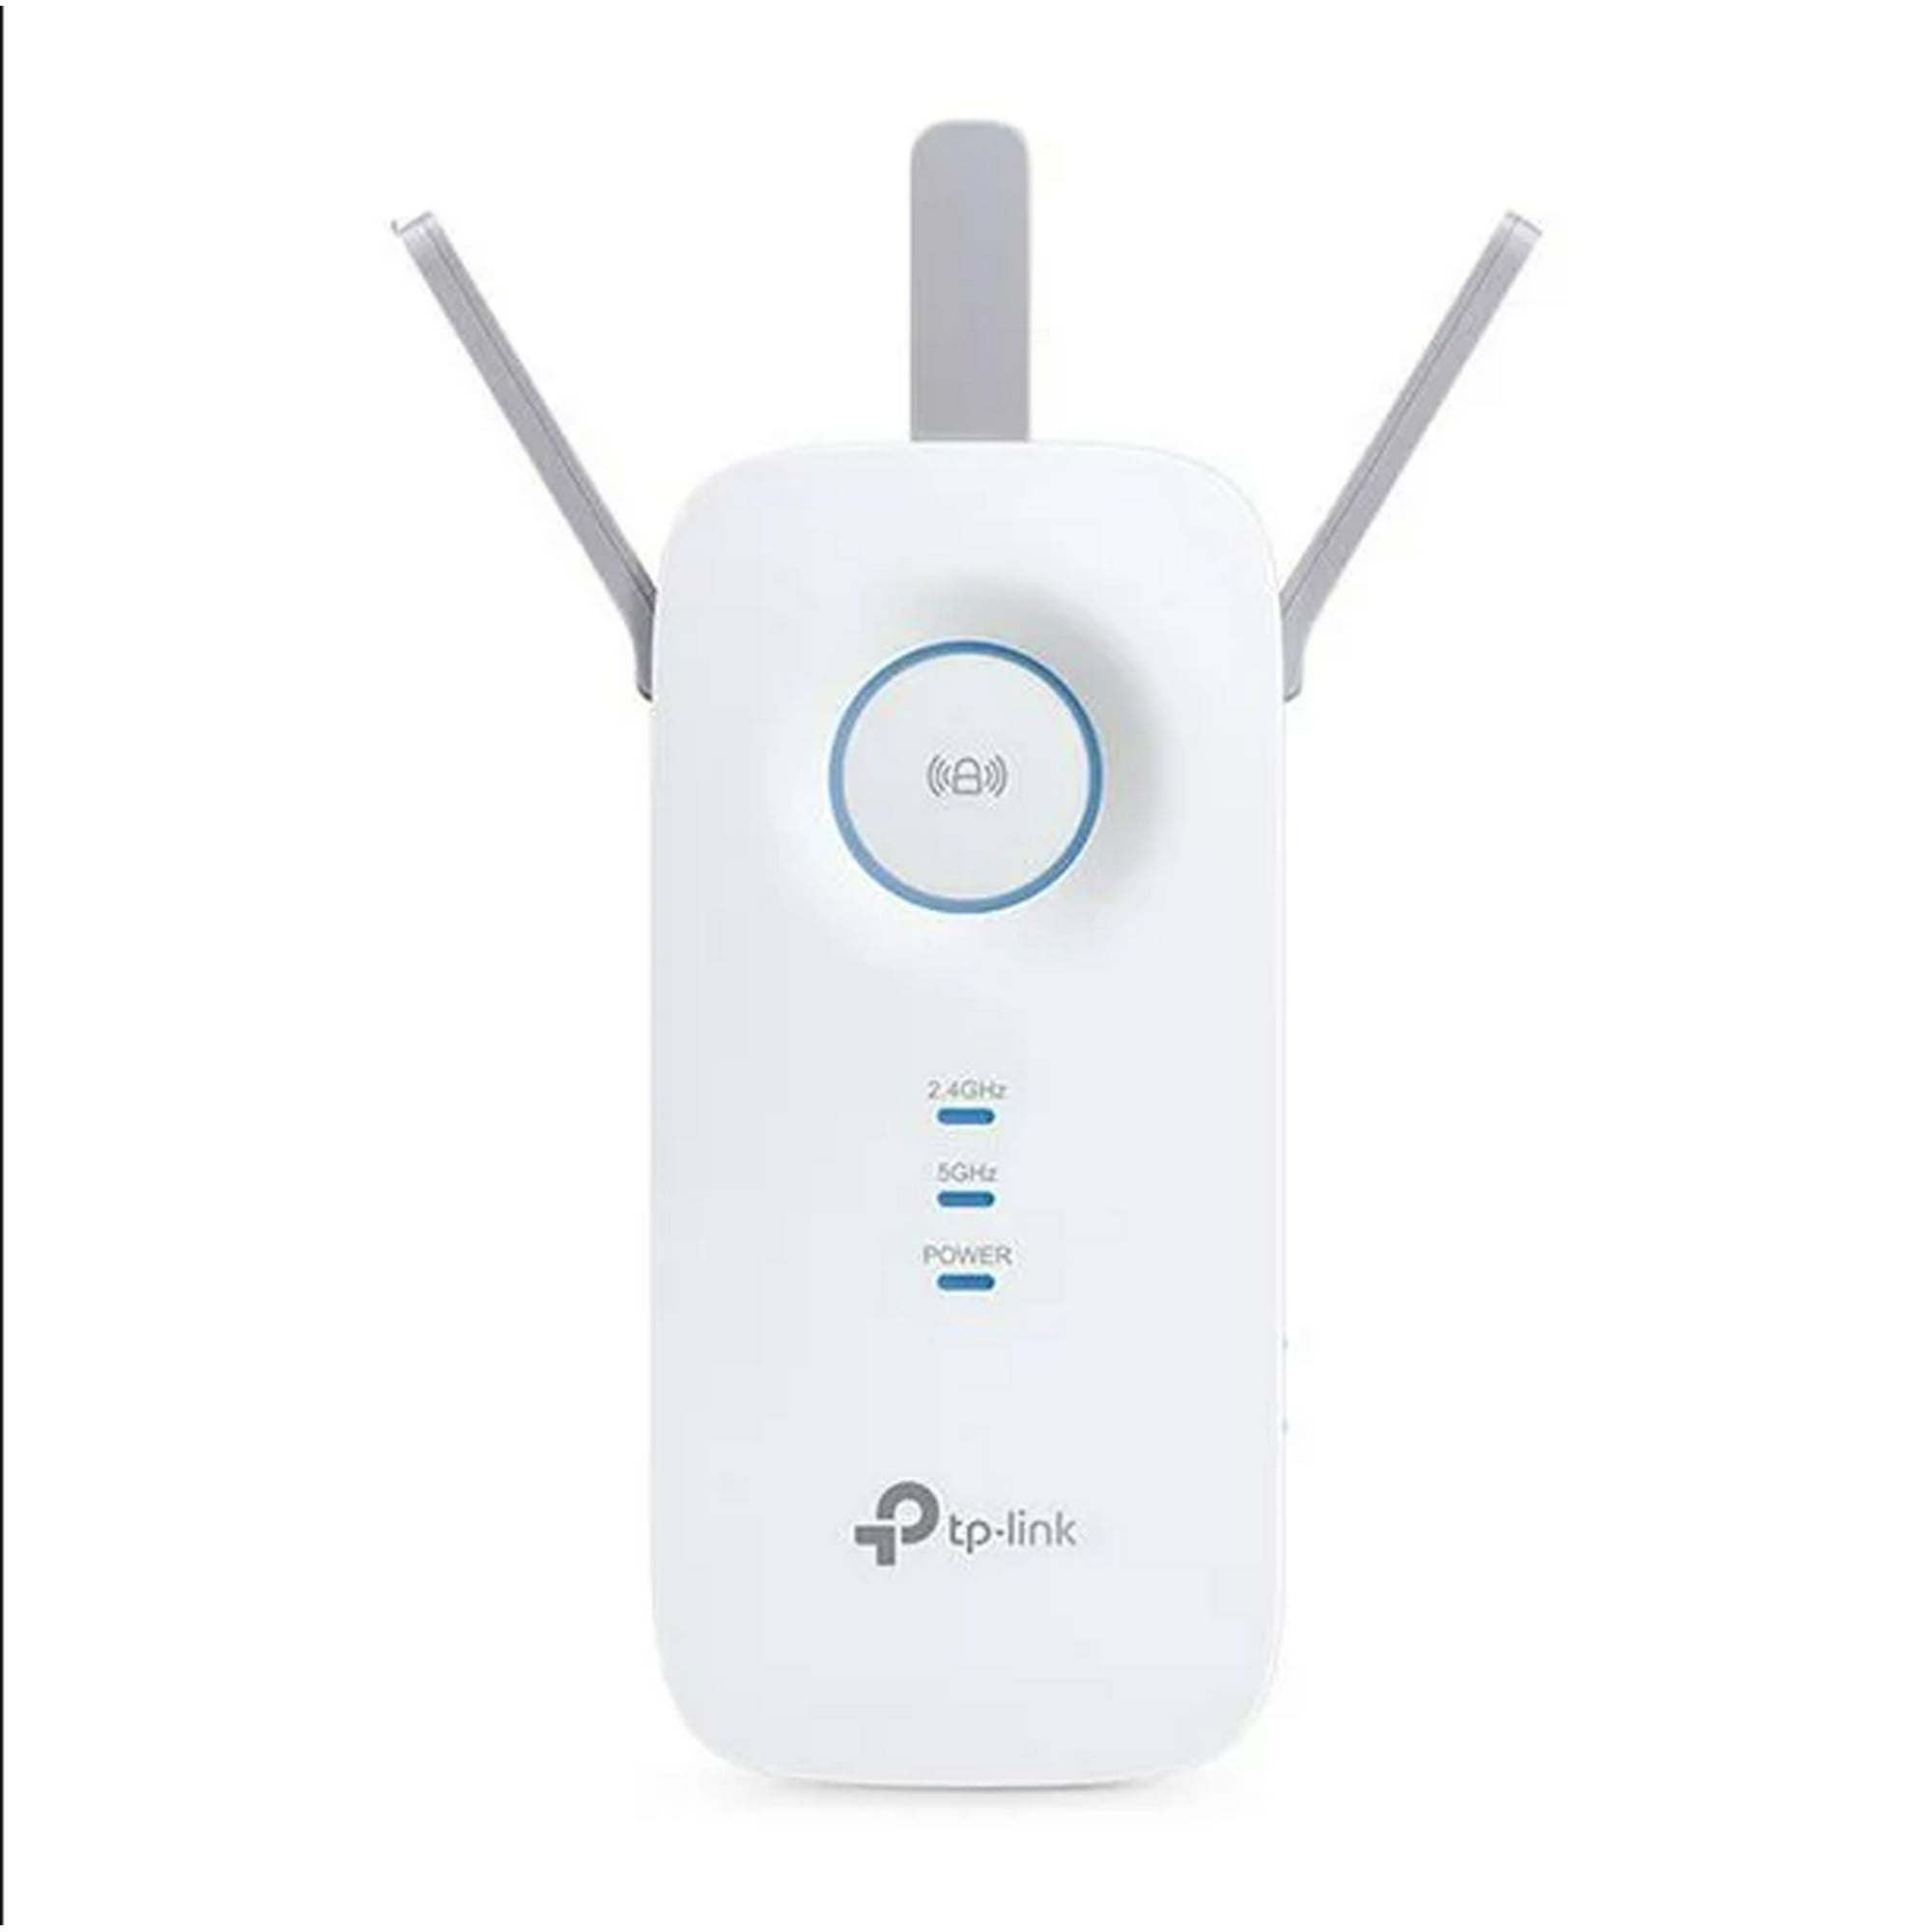 Restored TP-Link AC1900 WiFi Extender (RE550), Covers Up to 2800 Sq.ft and 35 Devices, 1900Mbps Dual Band Repeater, Internet Booster, Gigabit Ethernet Port( Refurbished) - Walmart.com